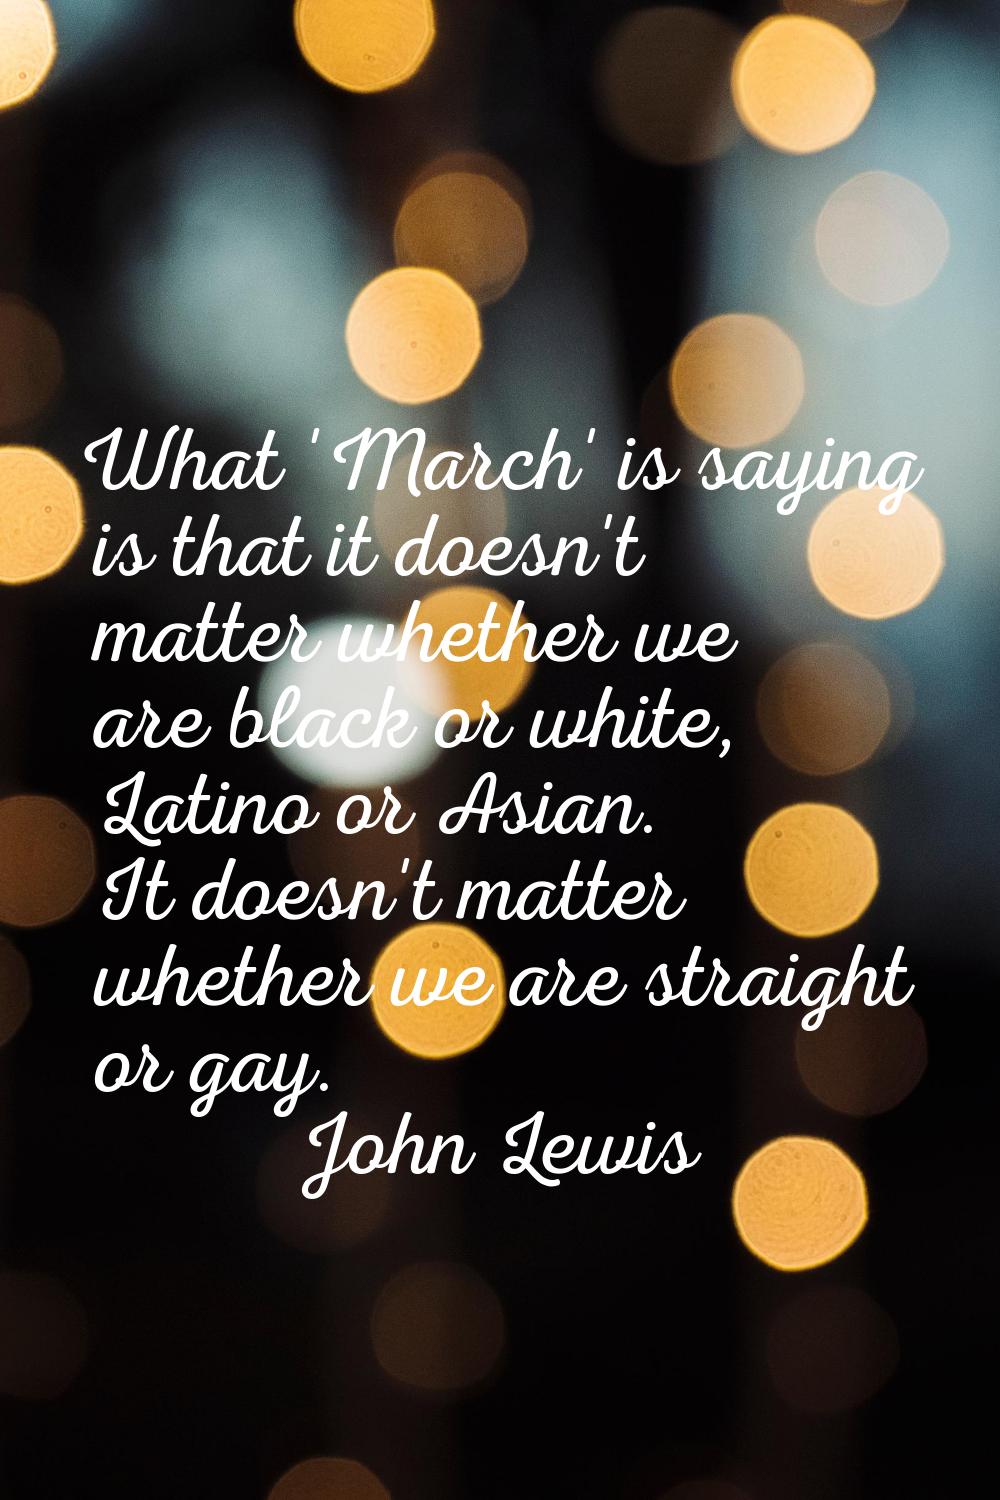 What 'March' is saying is that it doesn't matter whether we are black or white, Latino or Asian. It